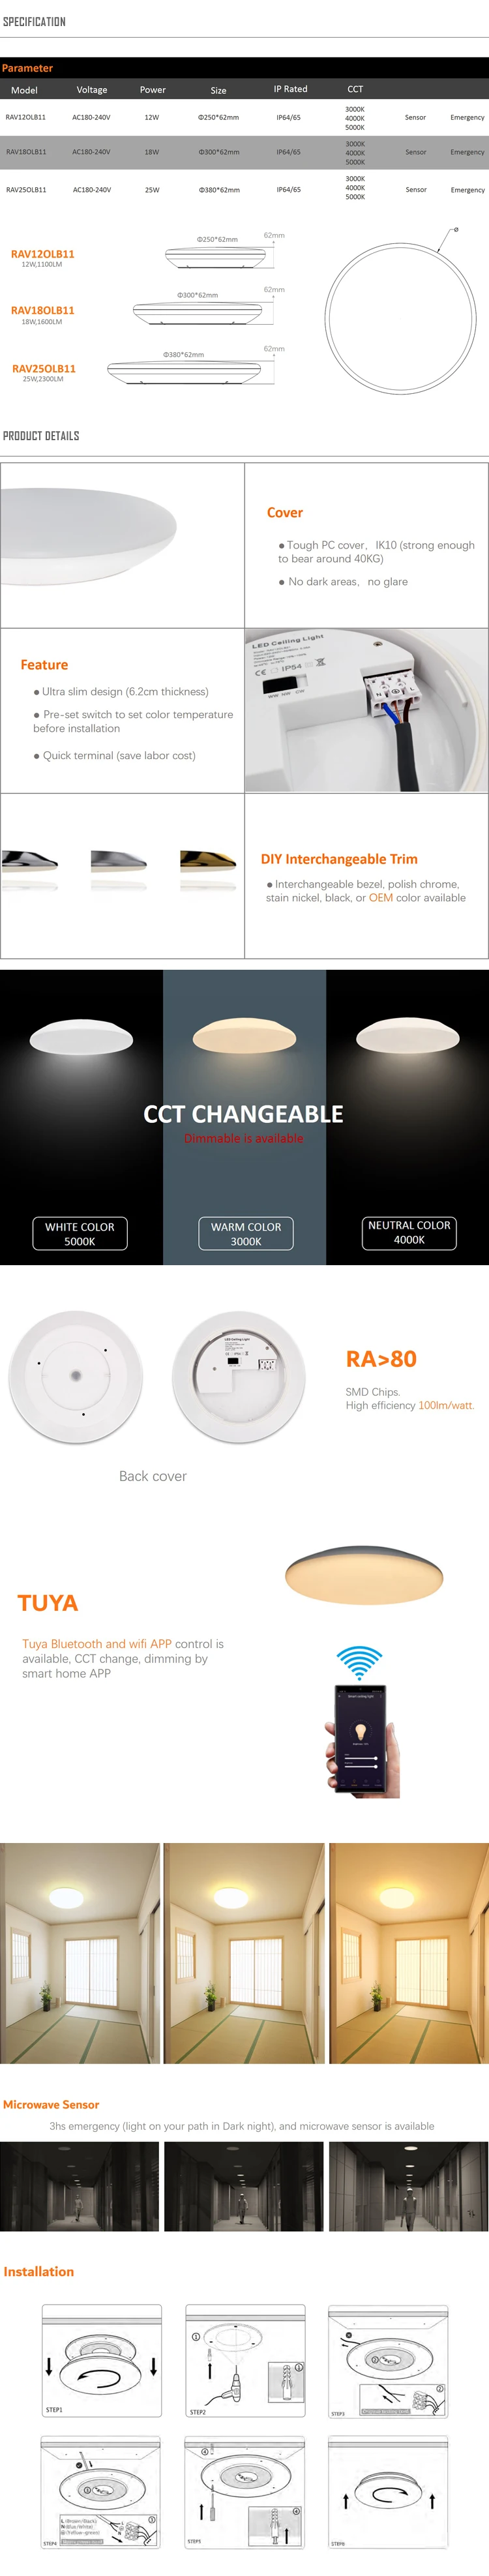 CE Rohs SAA 12W 25W SAA Approved LED Ceiling  Light LED Oyster Light led ceiling  light